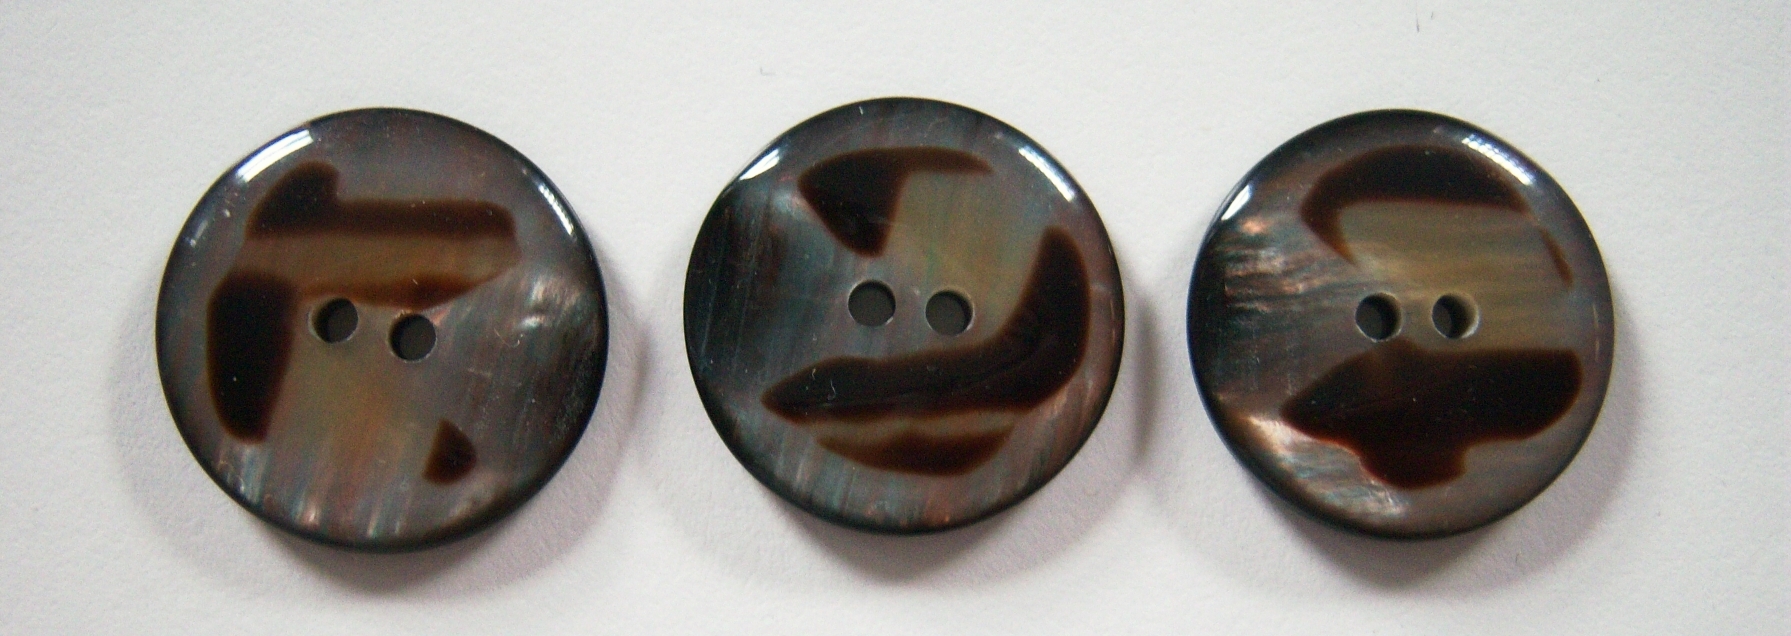 Black Pearlized 7/8" Poly Button